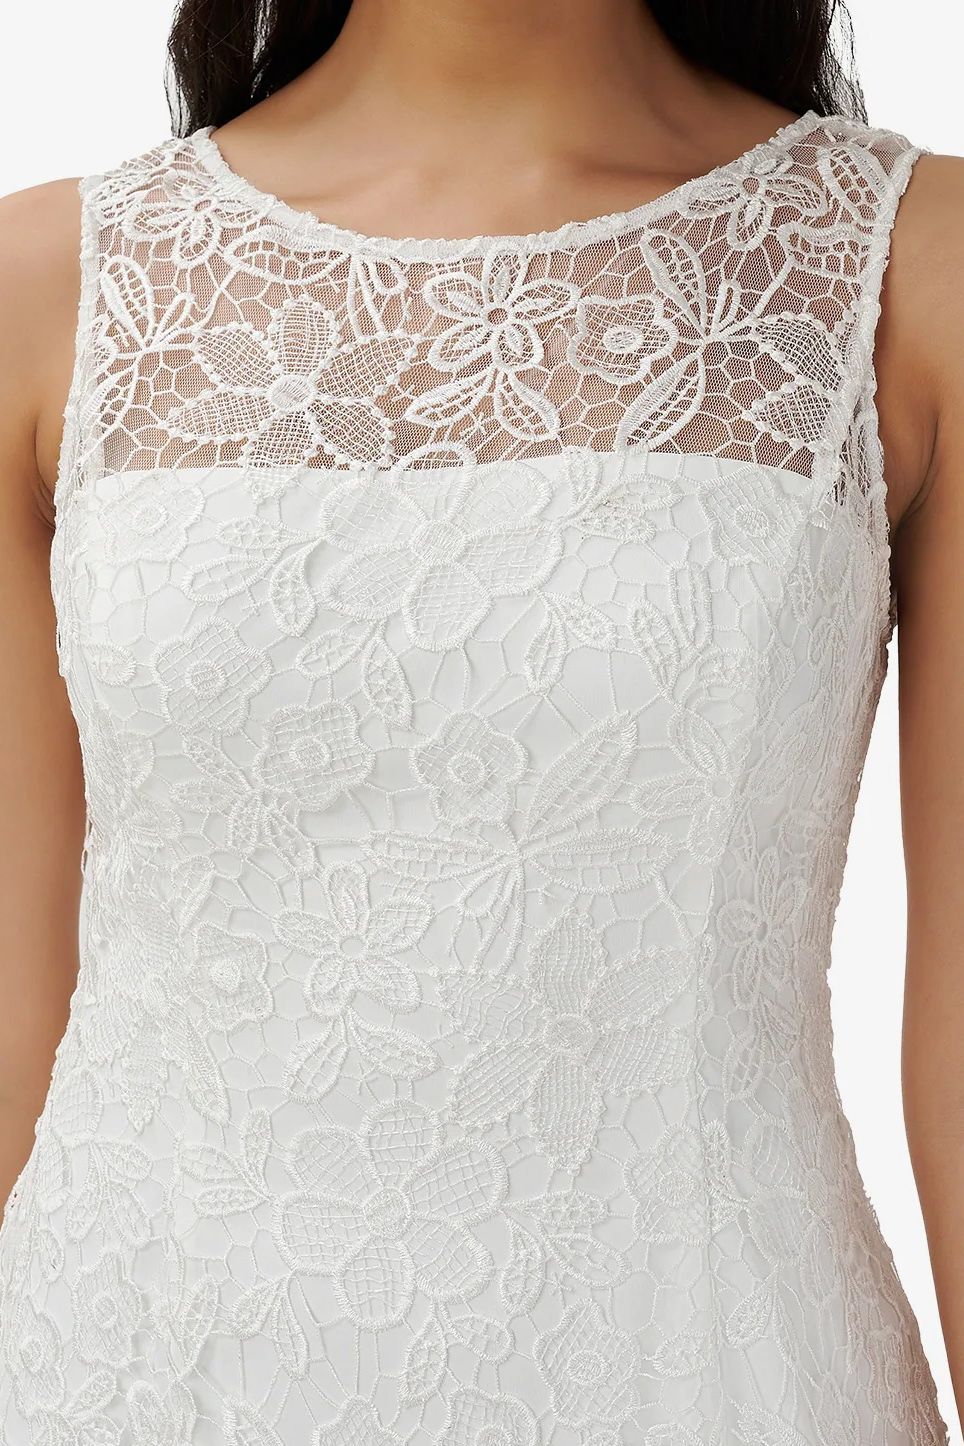 Adrianna Papell Day Short Lace Dress